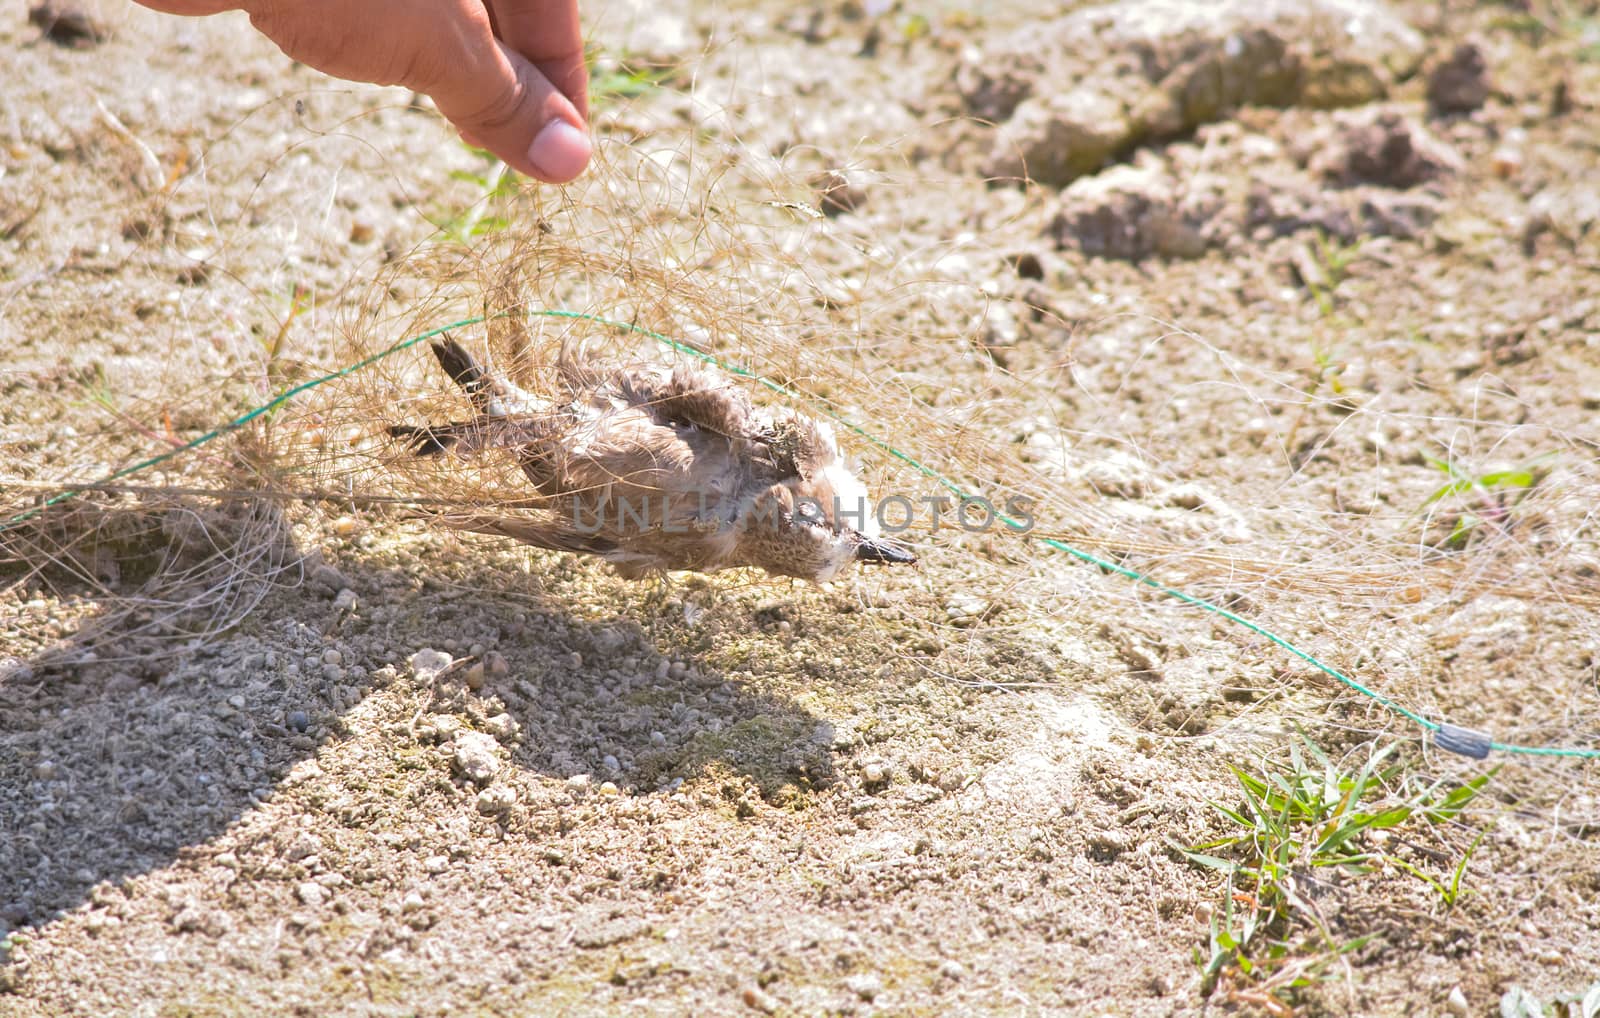 The bird had entangled its whole body in a discarded net. Though normally, the bird manages to remove the fishing net with its beak, the unlucky plover beak was stuck in the net and dead